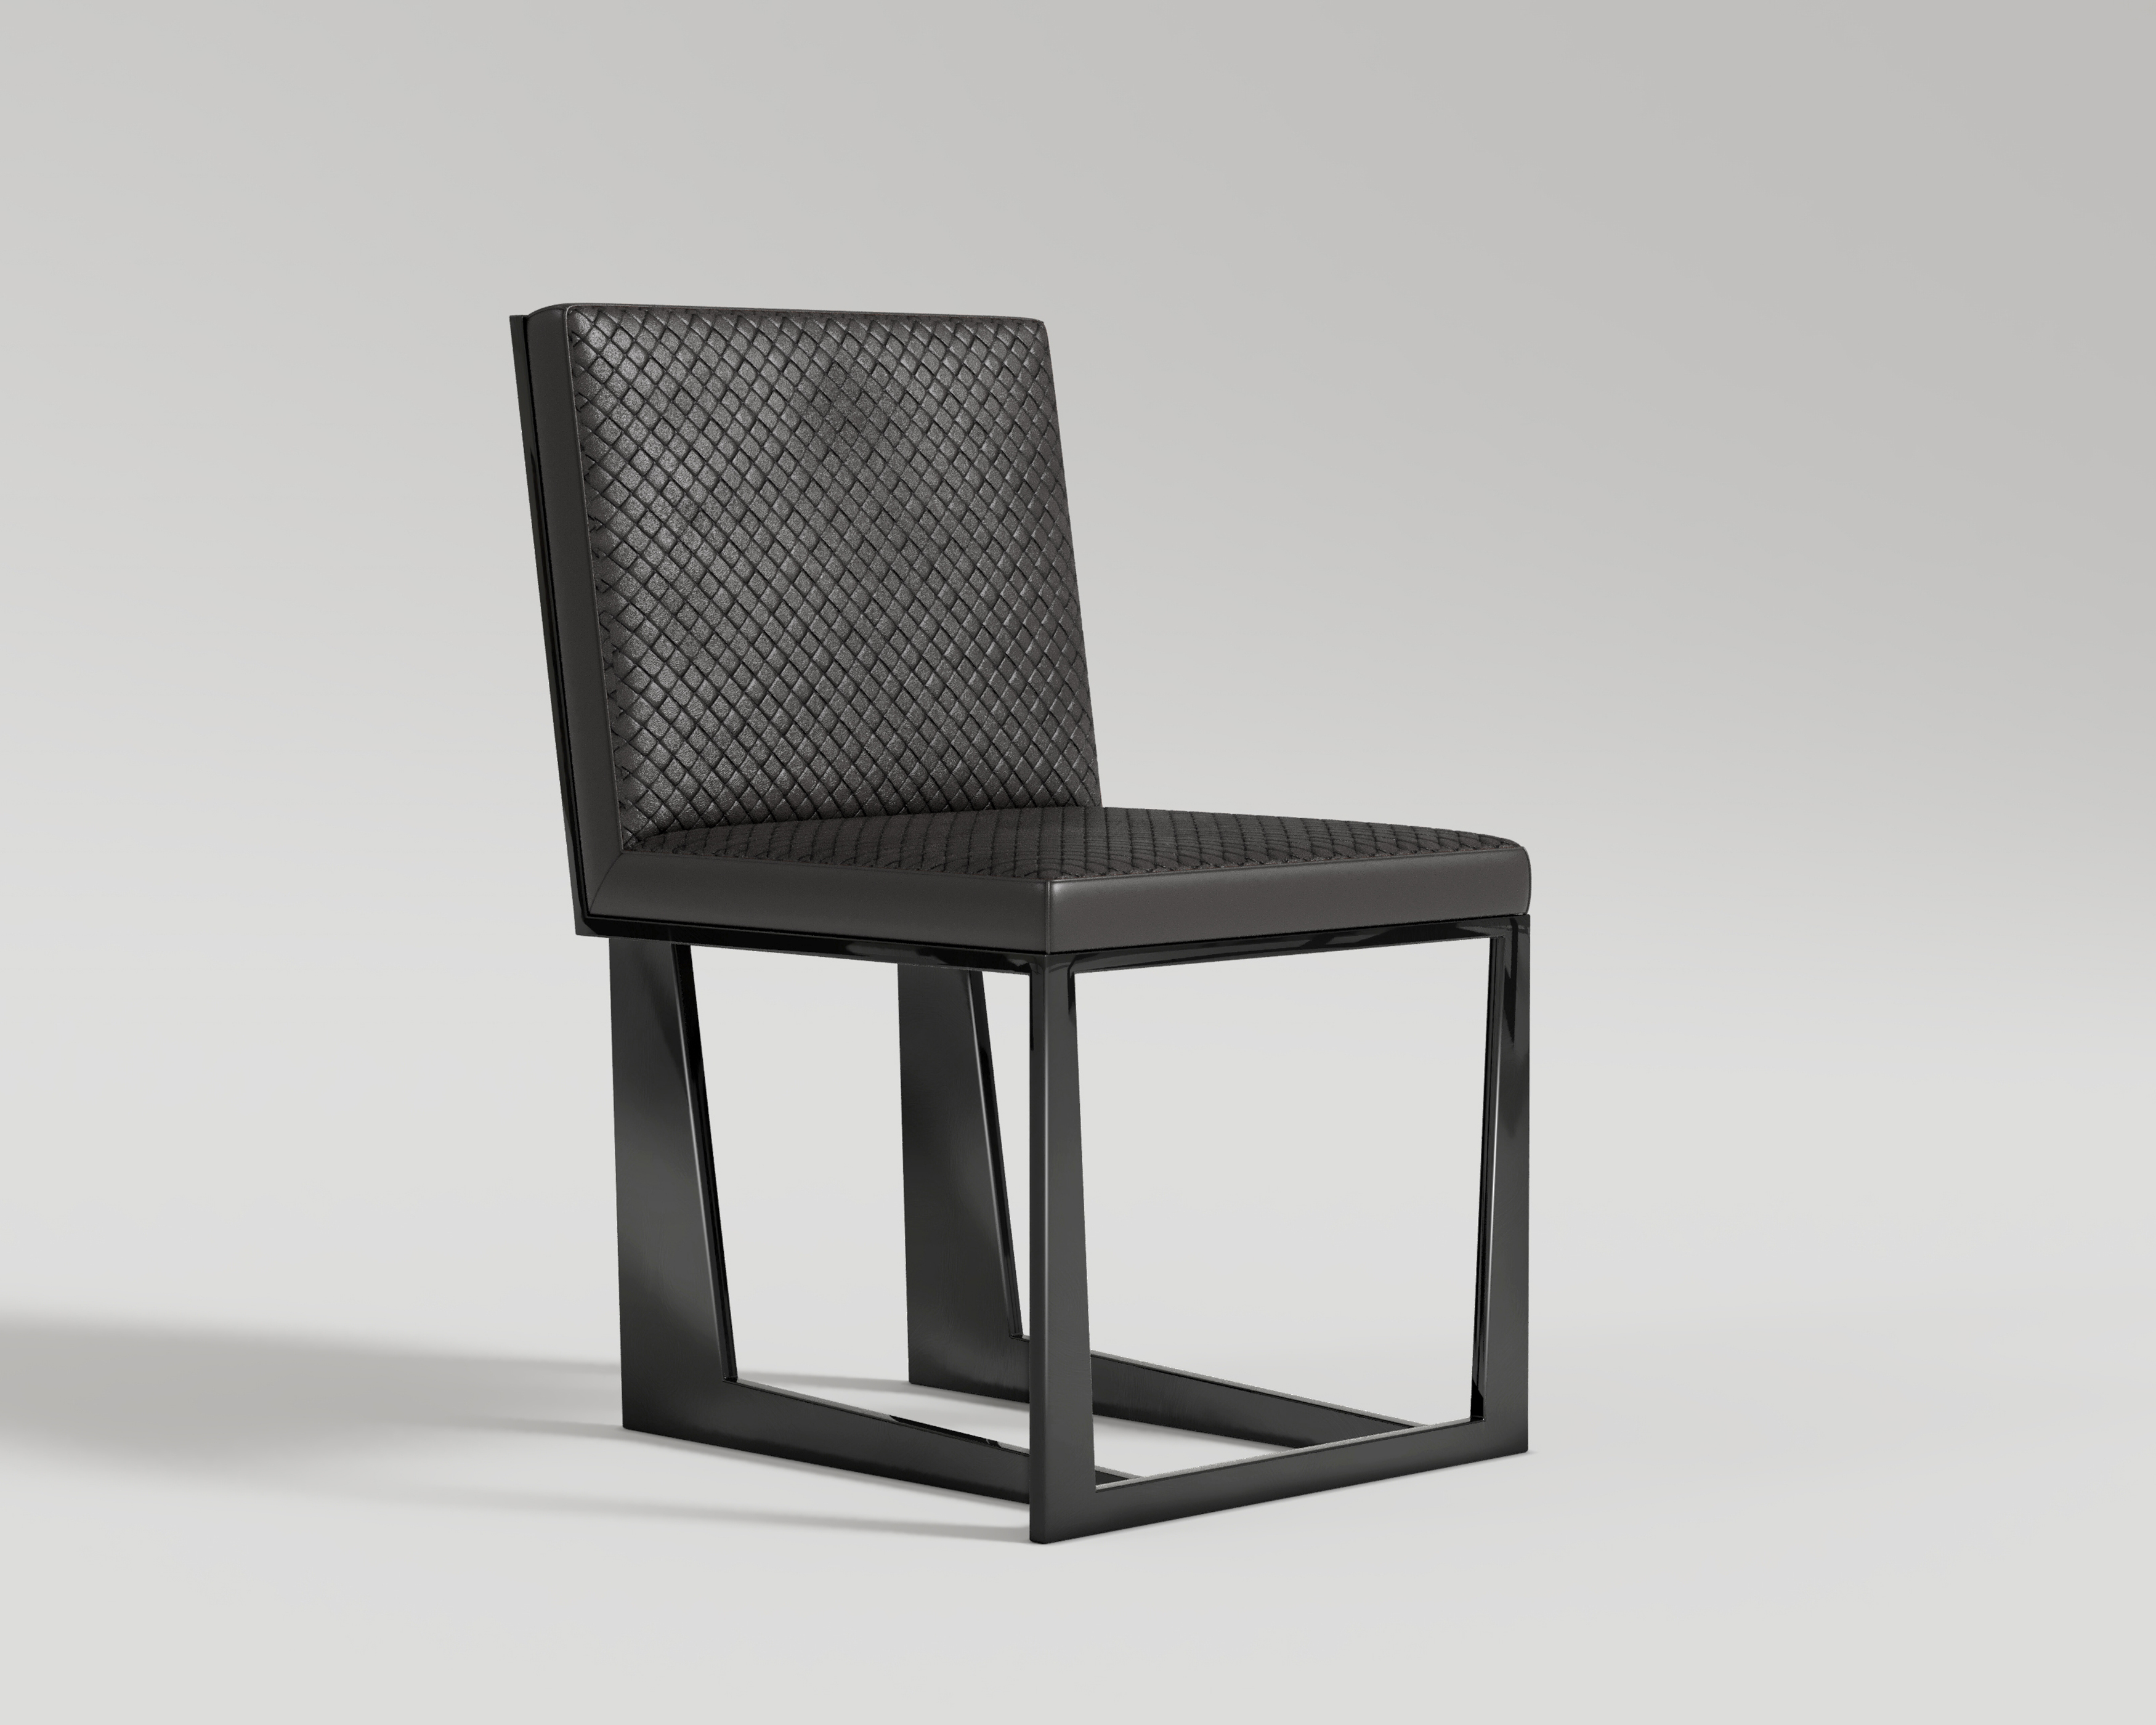 Affilato_Chair_black_lacquer_leather